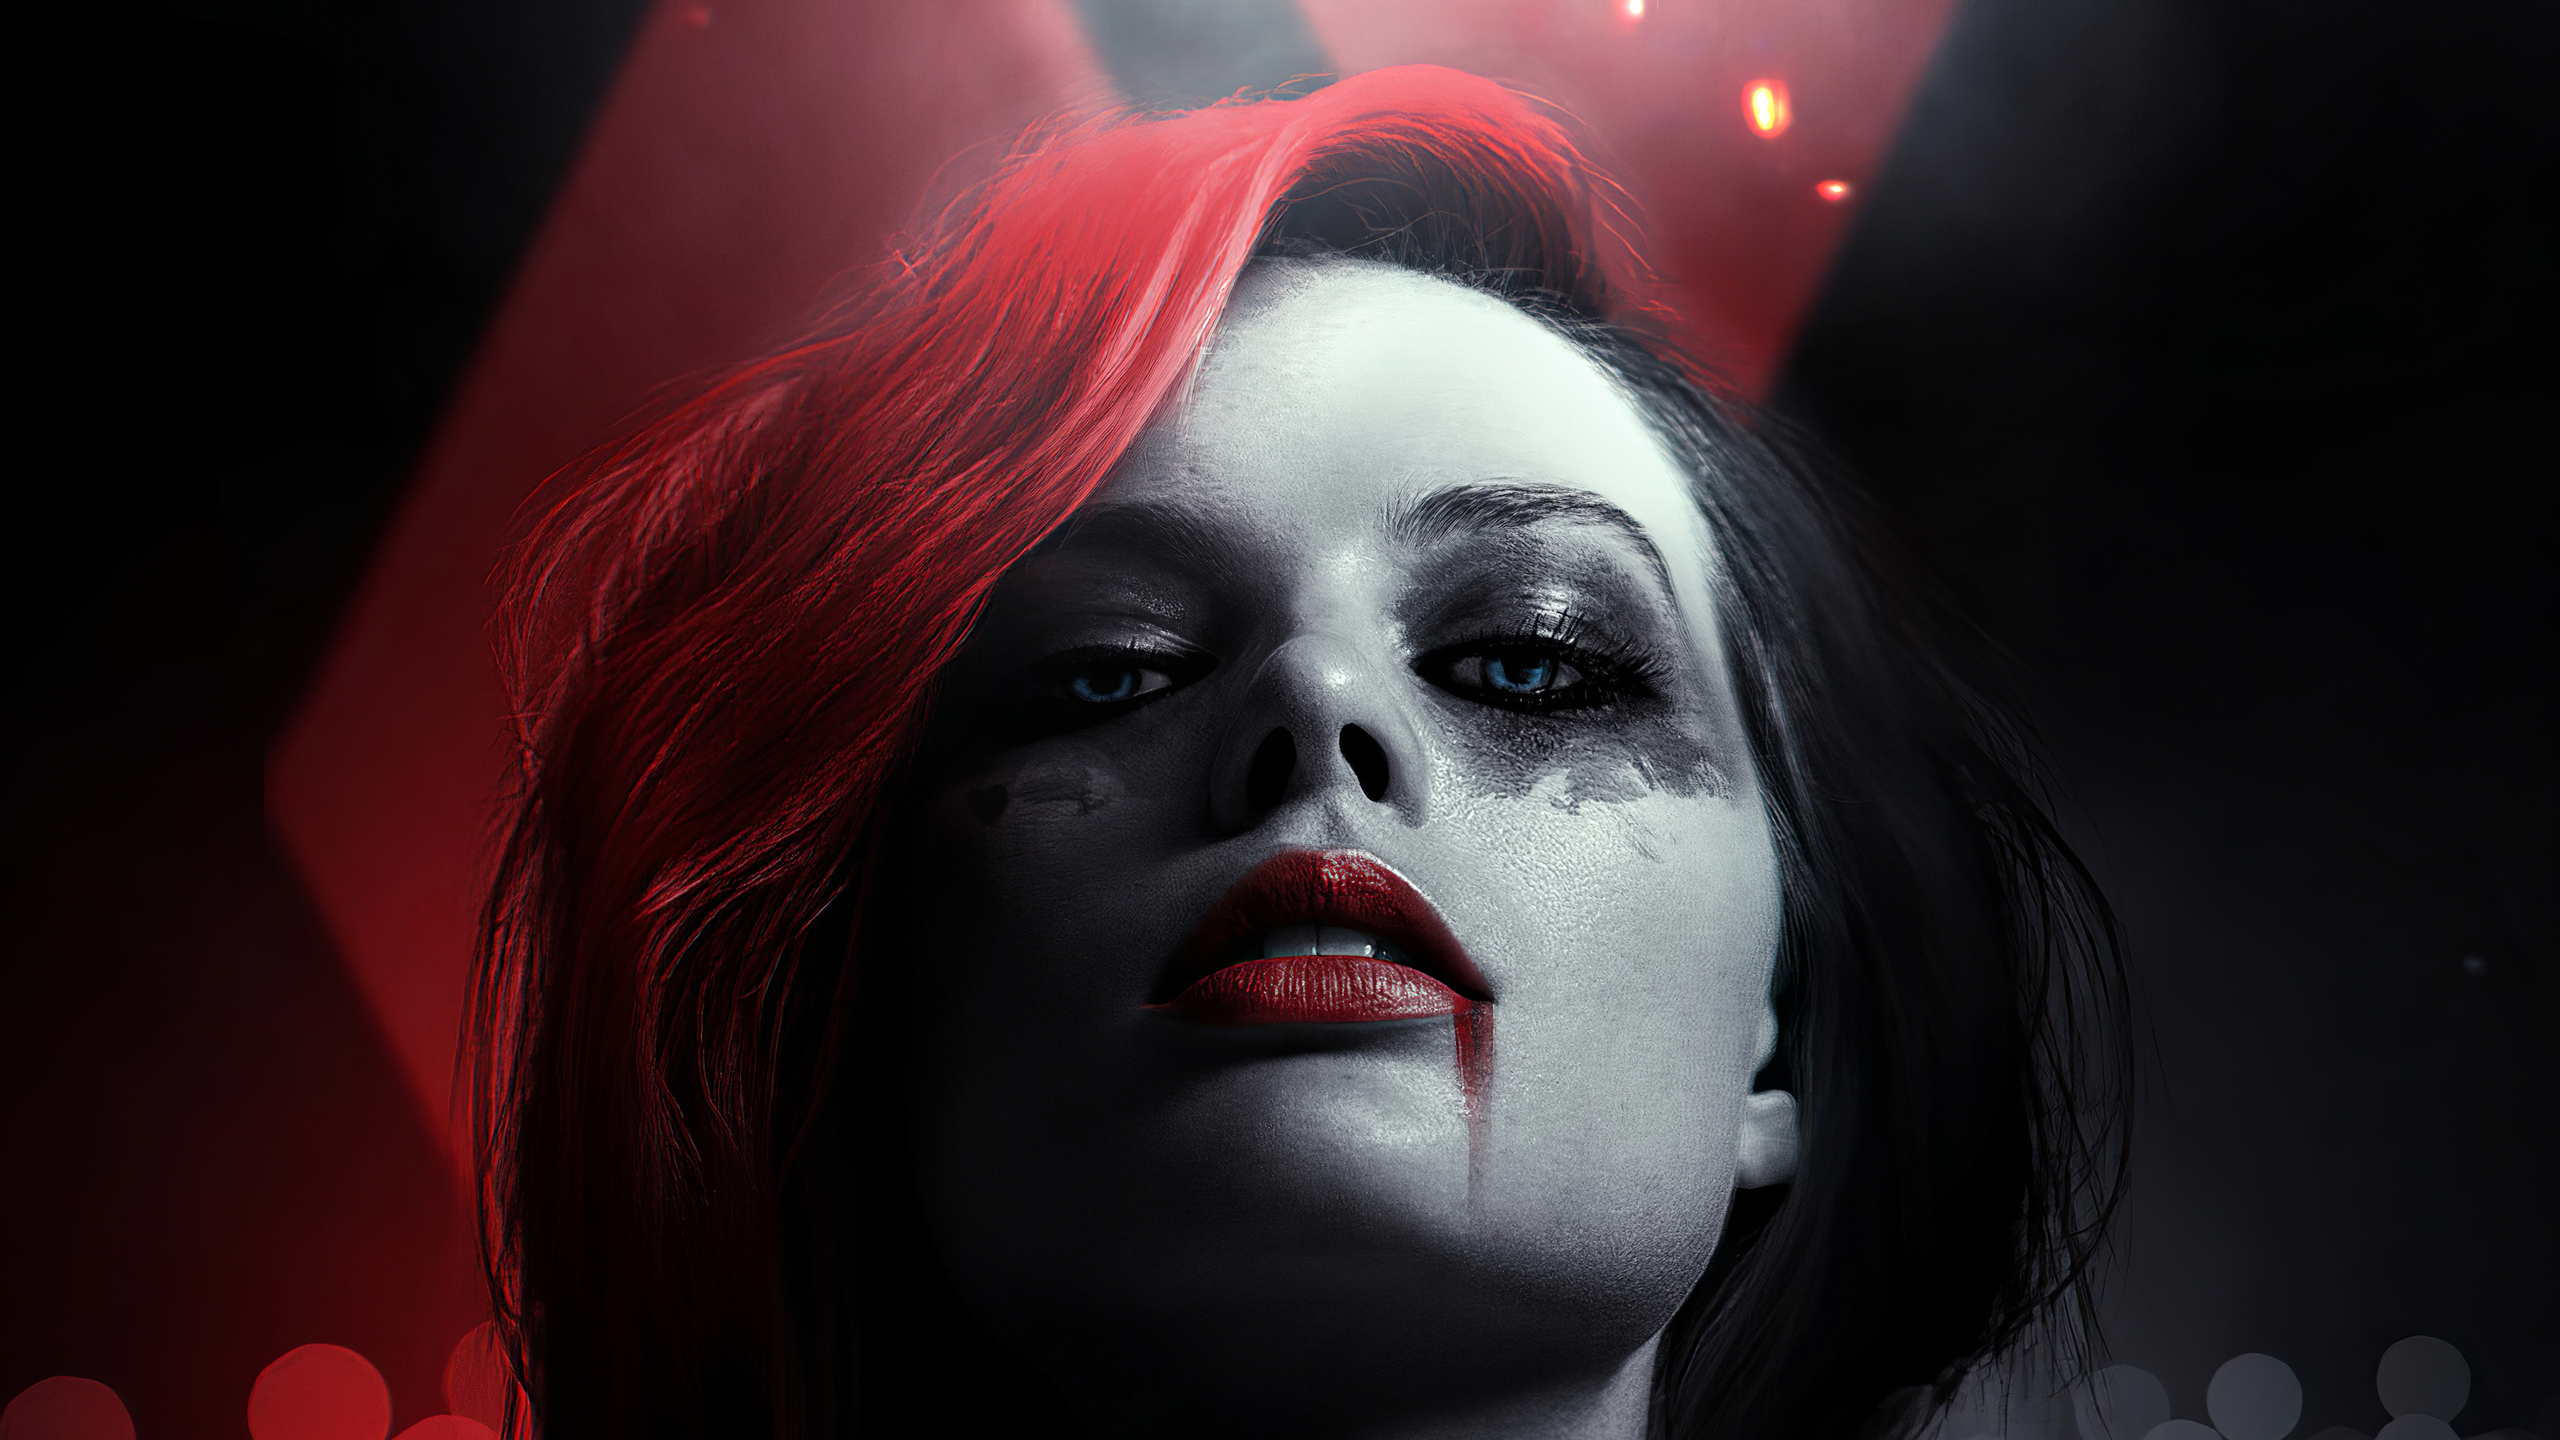 Harley Quinn 4k 2020 1440P Resolution HD 4k Wallpaper, Image, Background, Photo and Picture